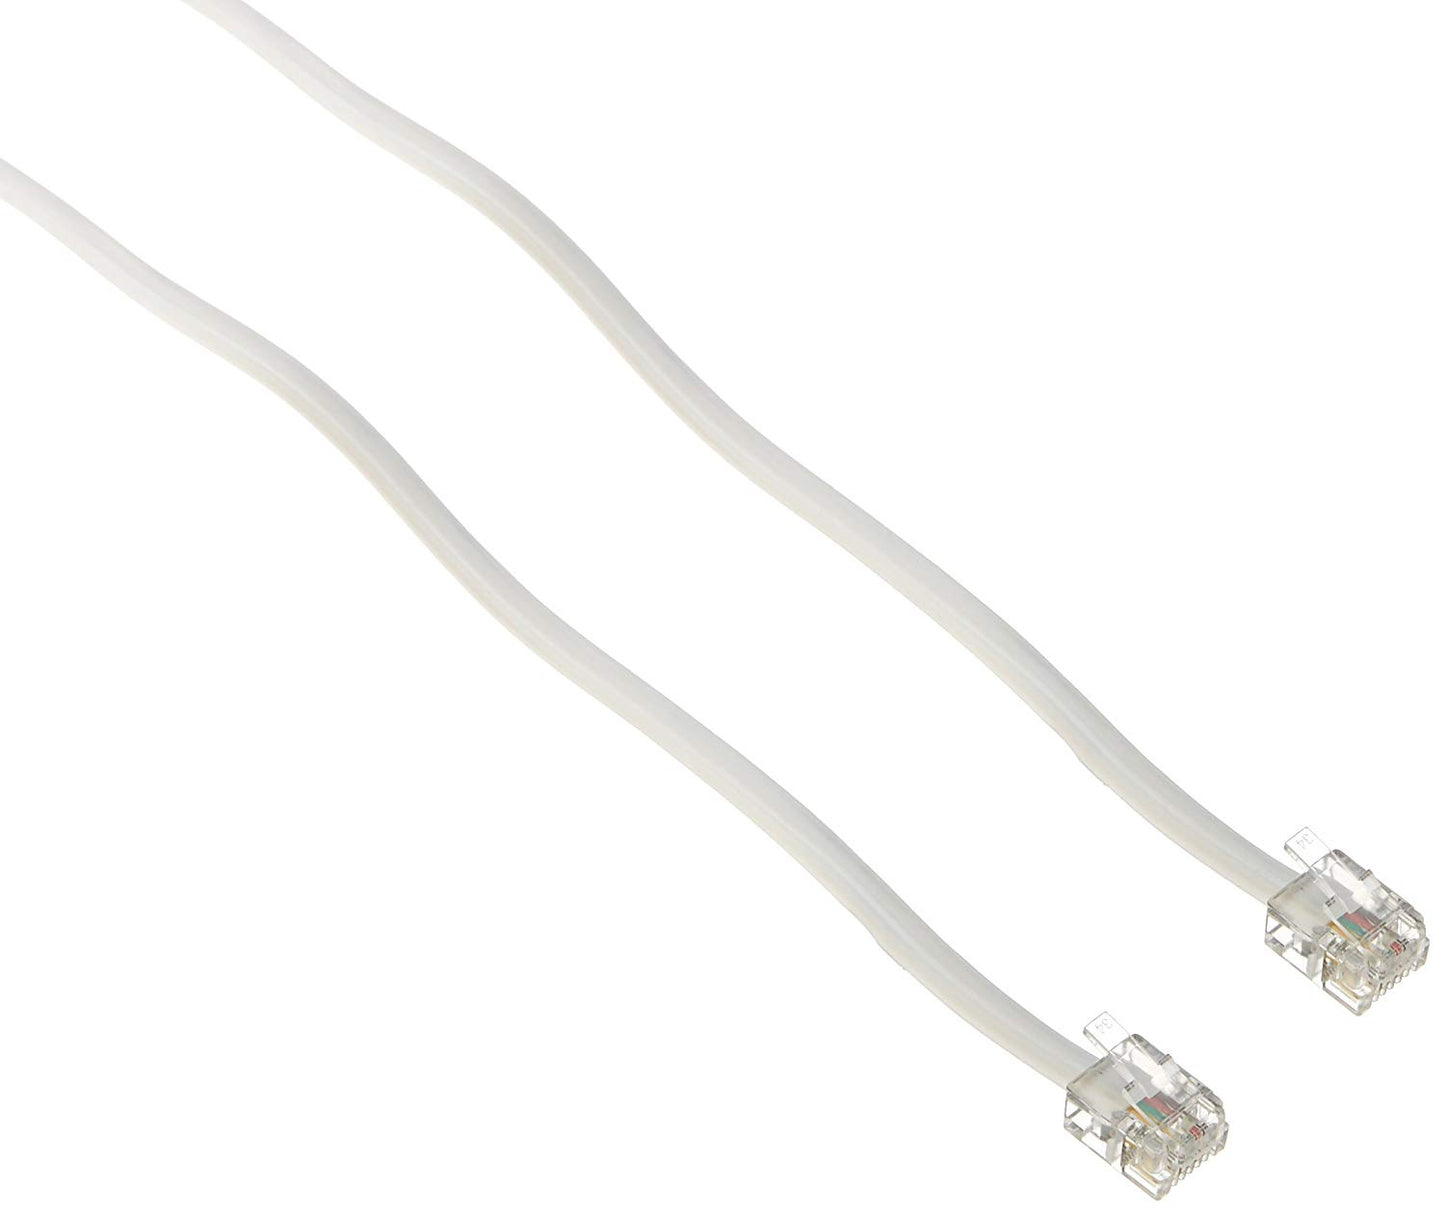 Telephone Extension Cord  50 Feet Long Phone Cable Line Wire - White